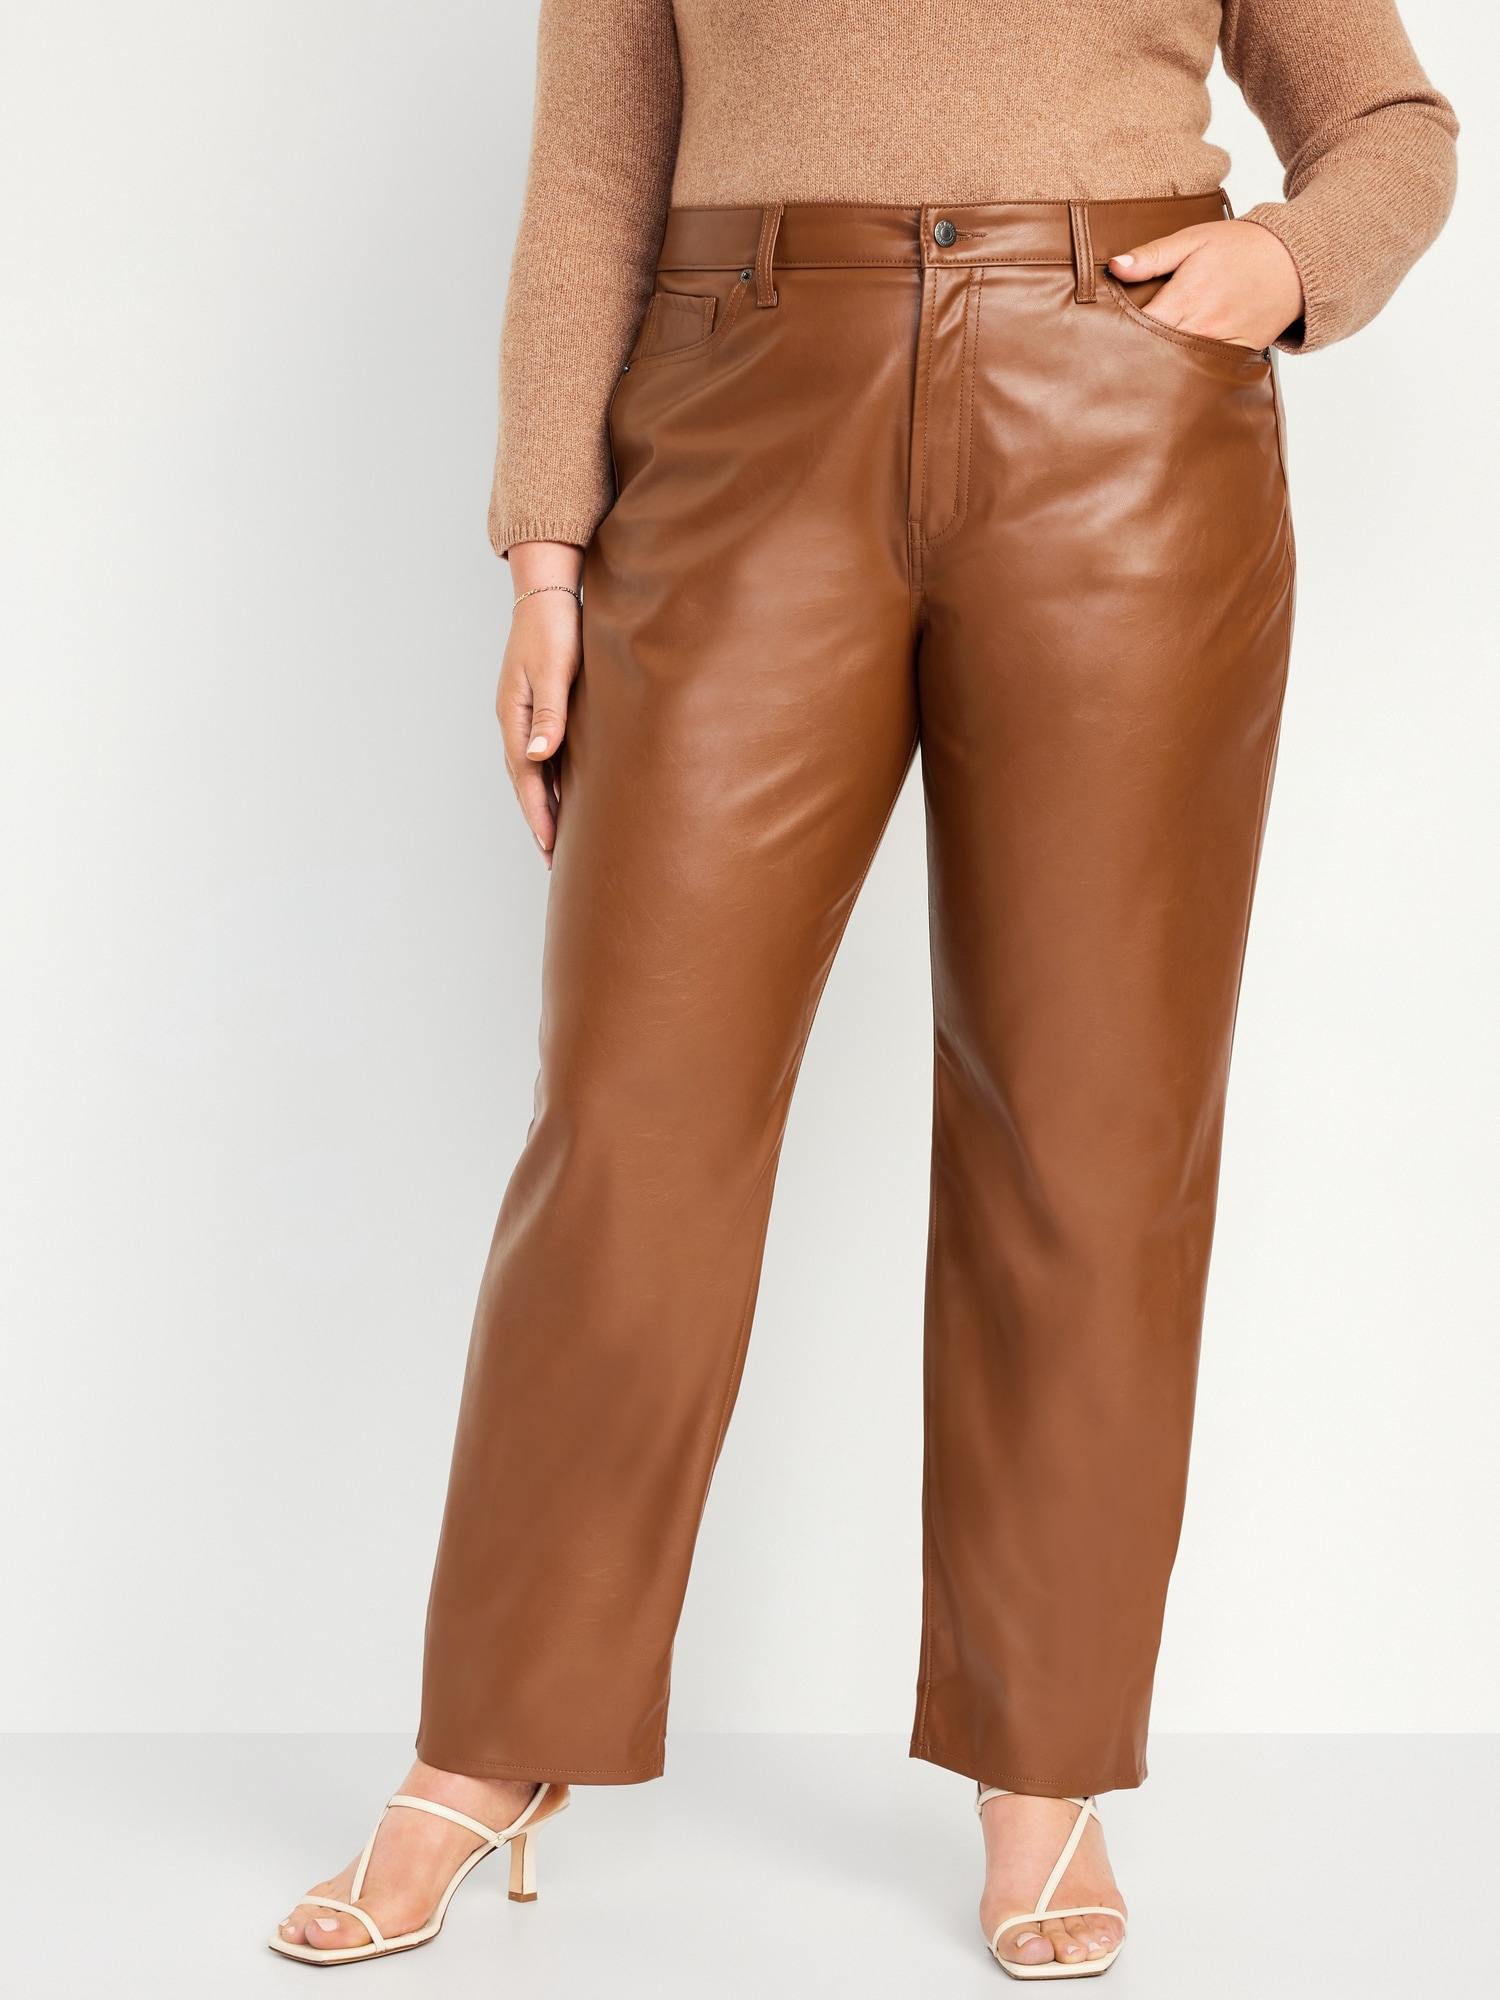 NA-KD faux leather low rise pants in brown